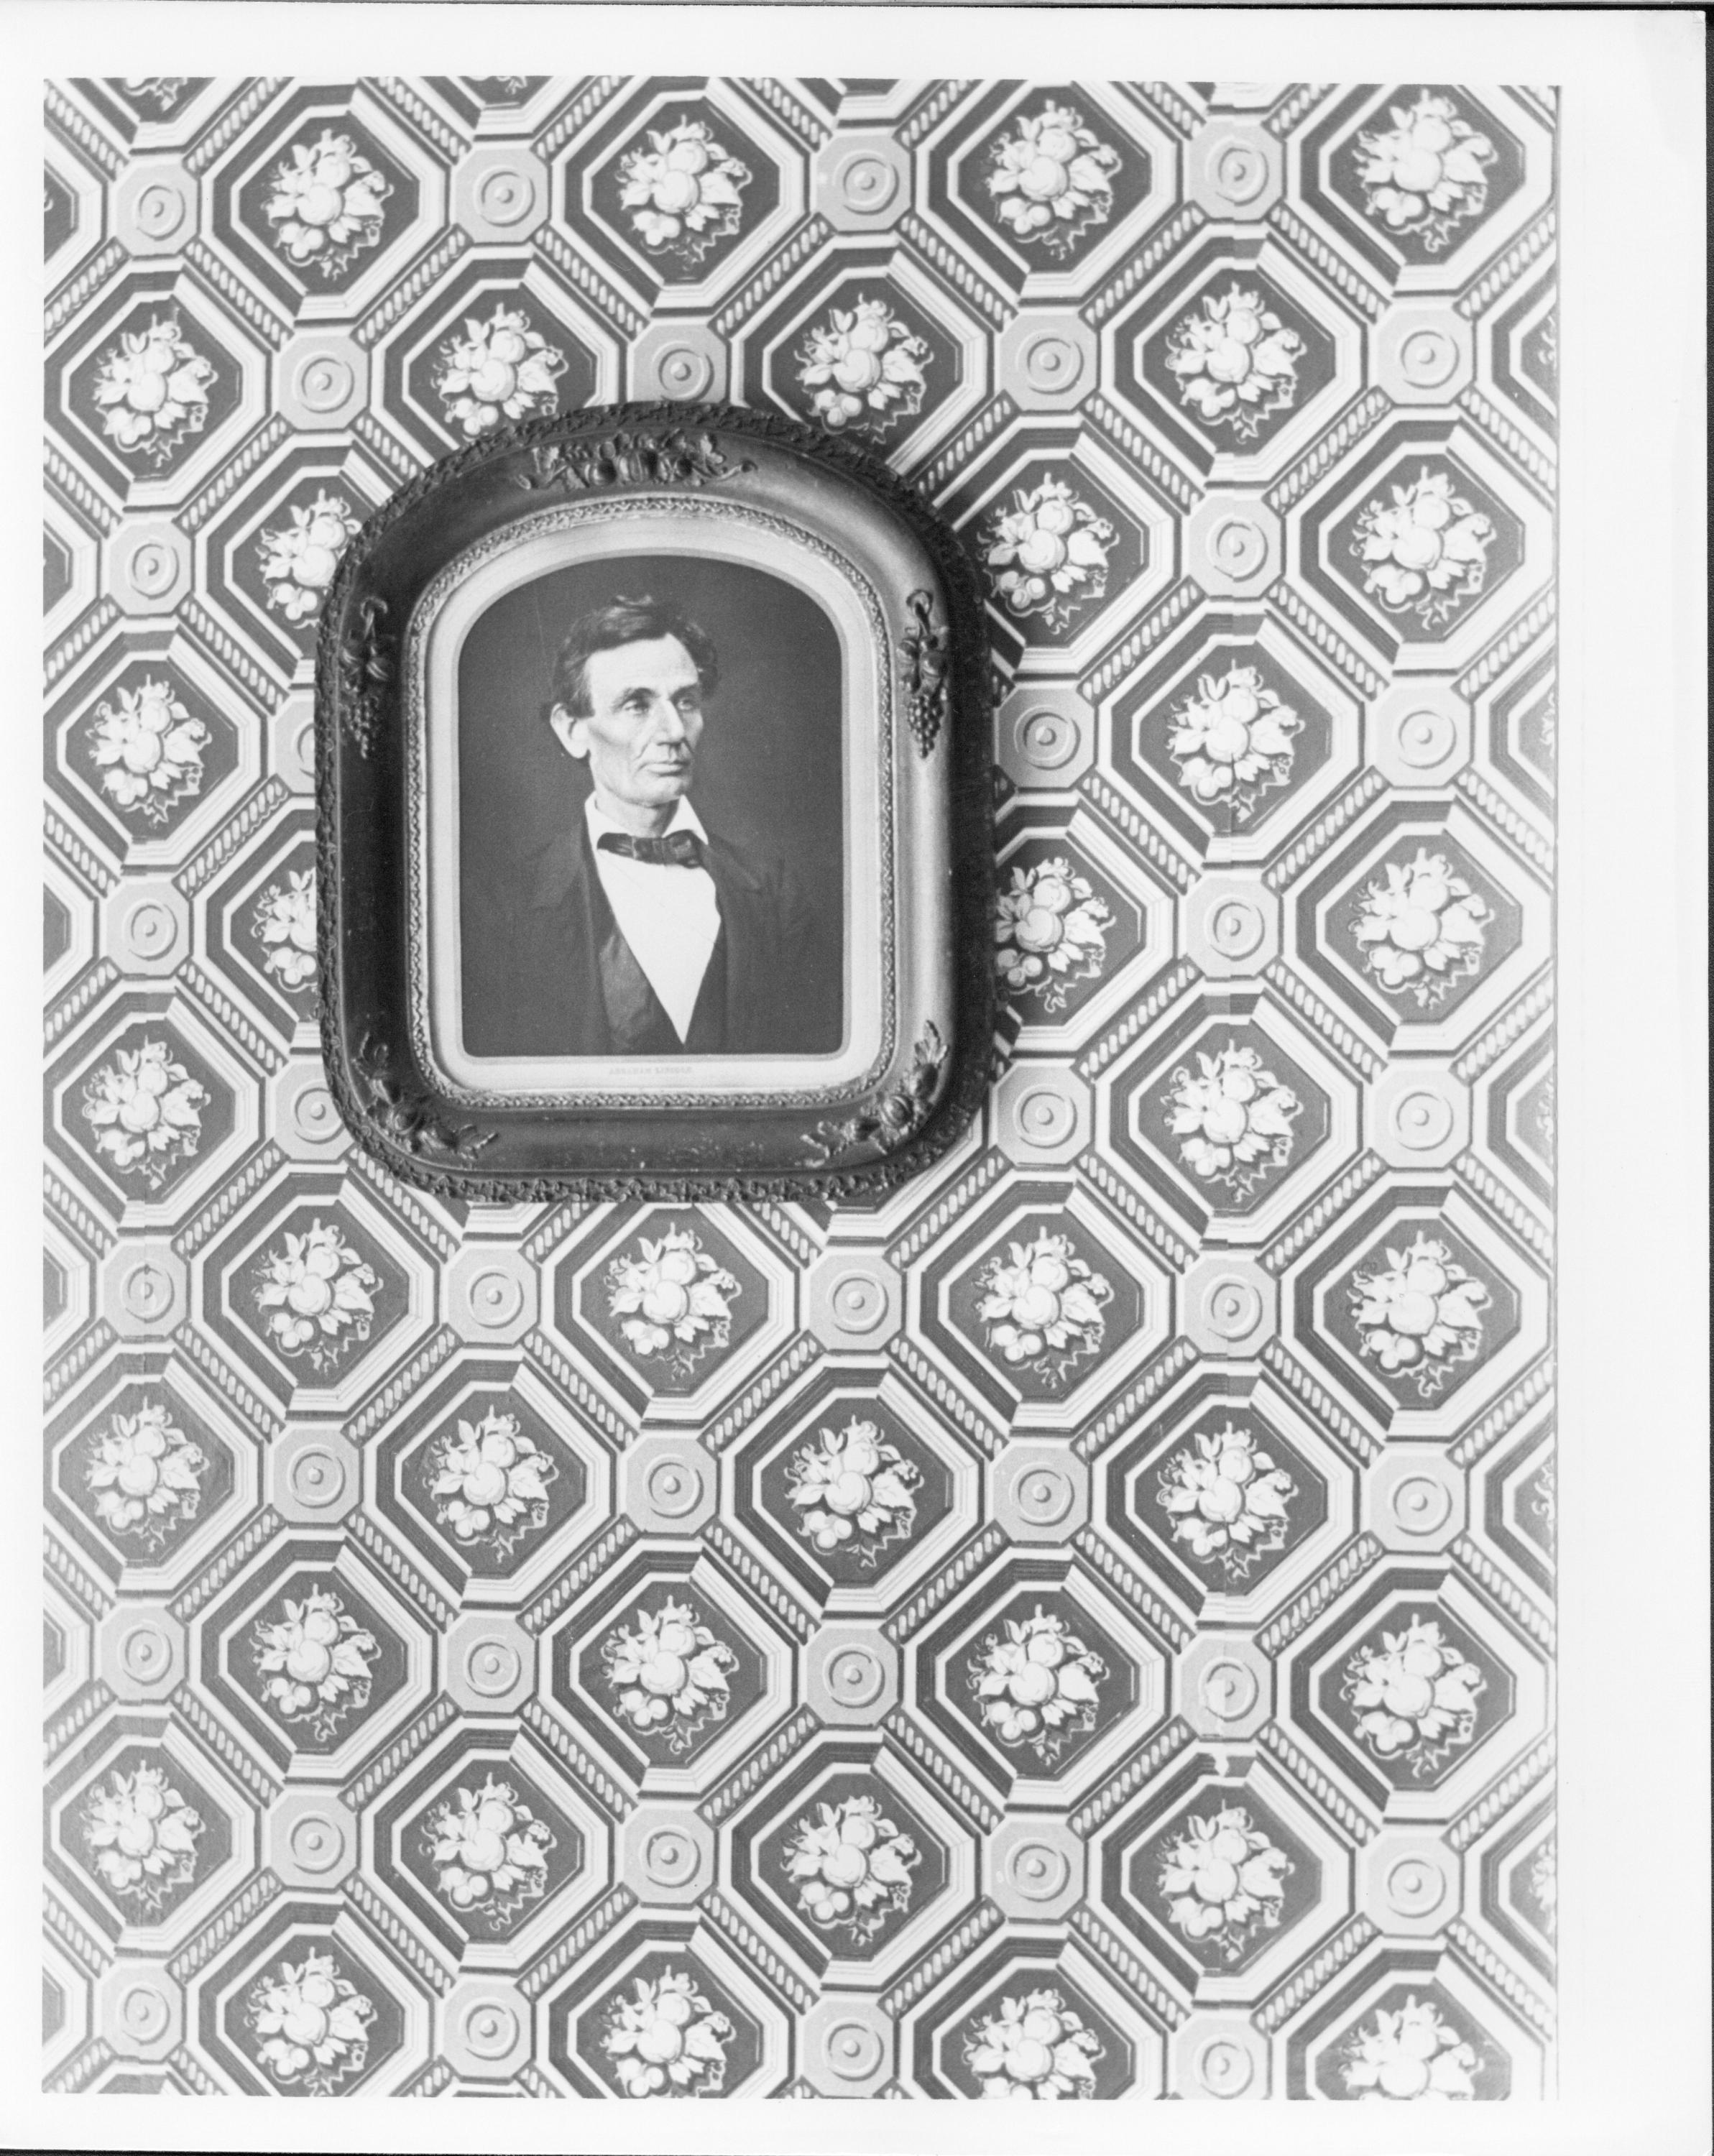 Abraham Lincoln photograph (reprint) in frame in Lincoln Home Front Hall. Photo based on image by Alexander Hesler taken June 3, 1860 in Springfield.